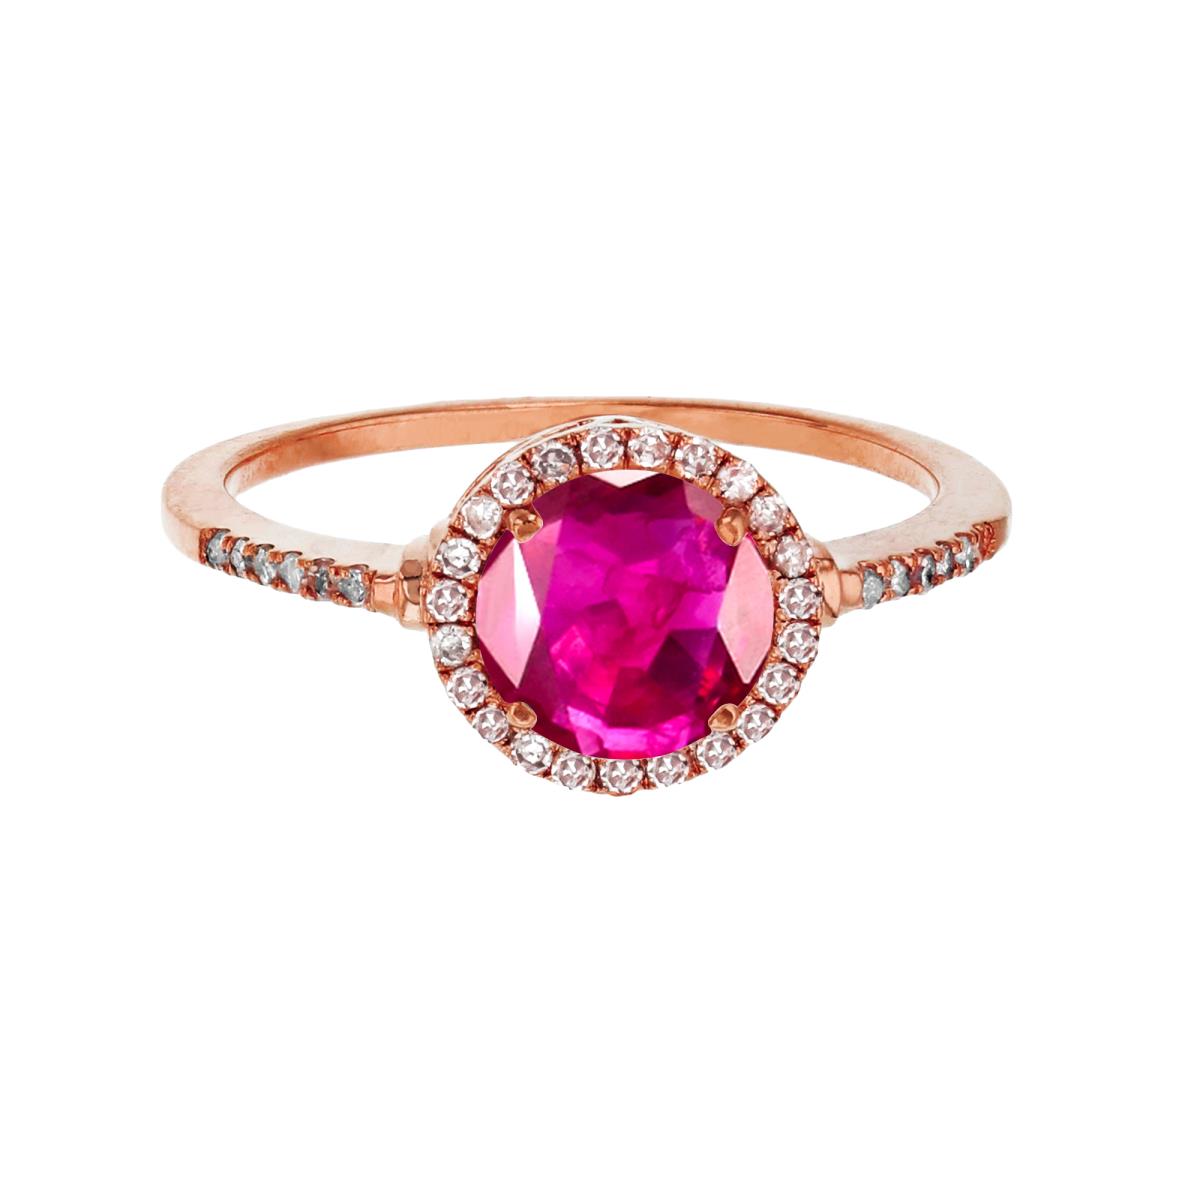 10K Rose Gold 7mm Round Glass Filled Ruby & 0.18 CTTW Diamond Halo Ring